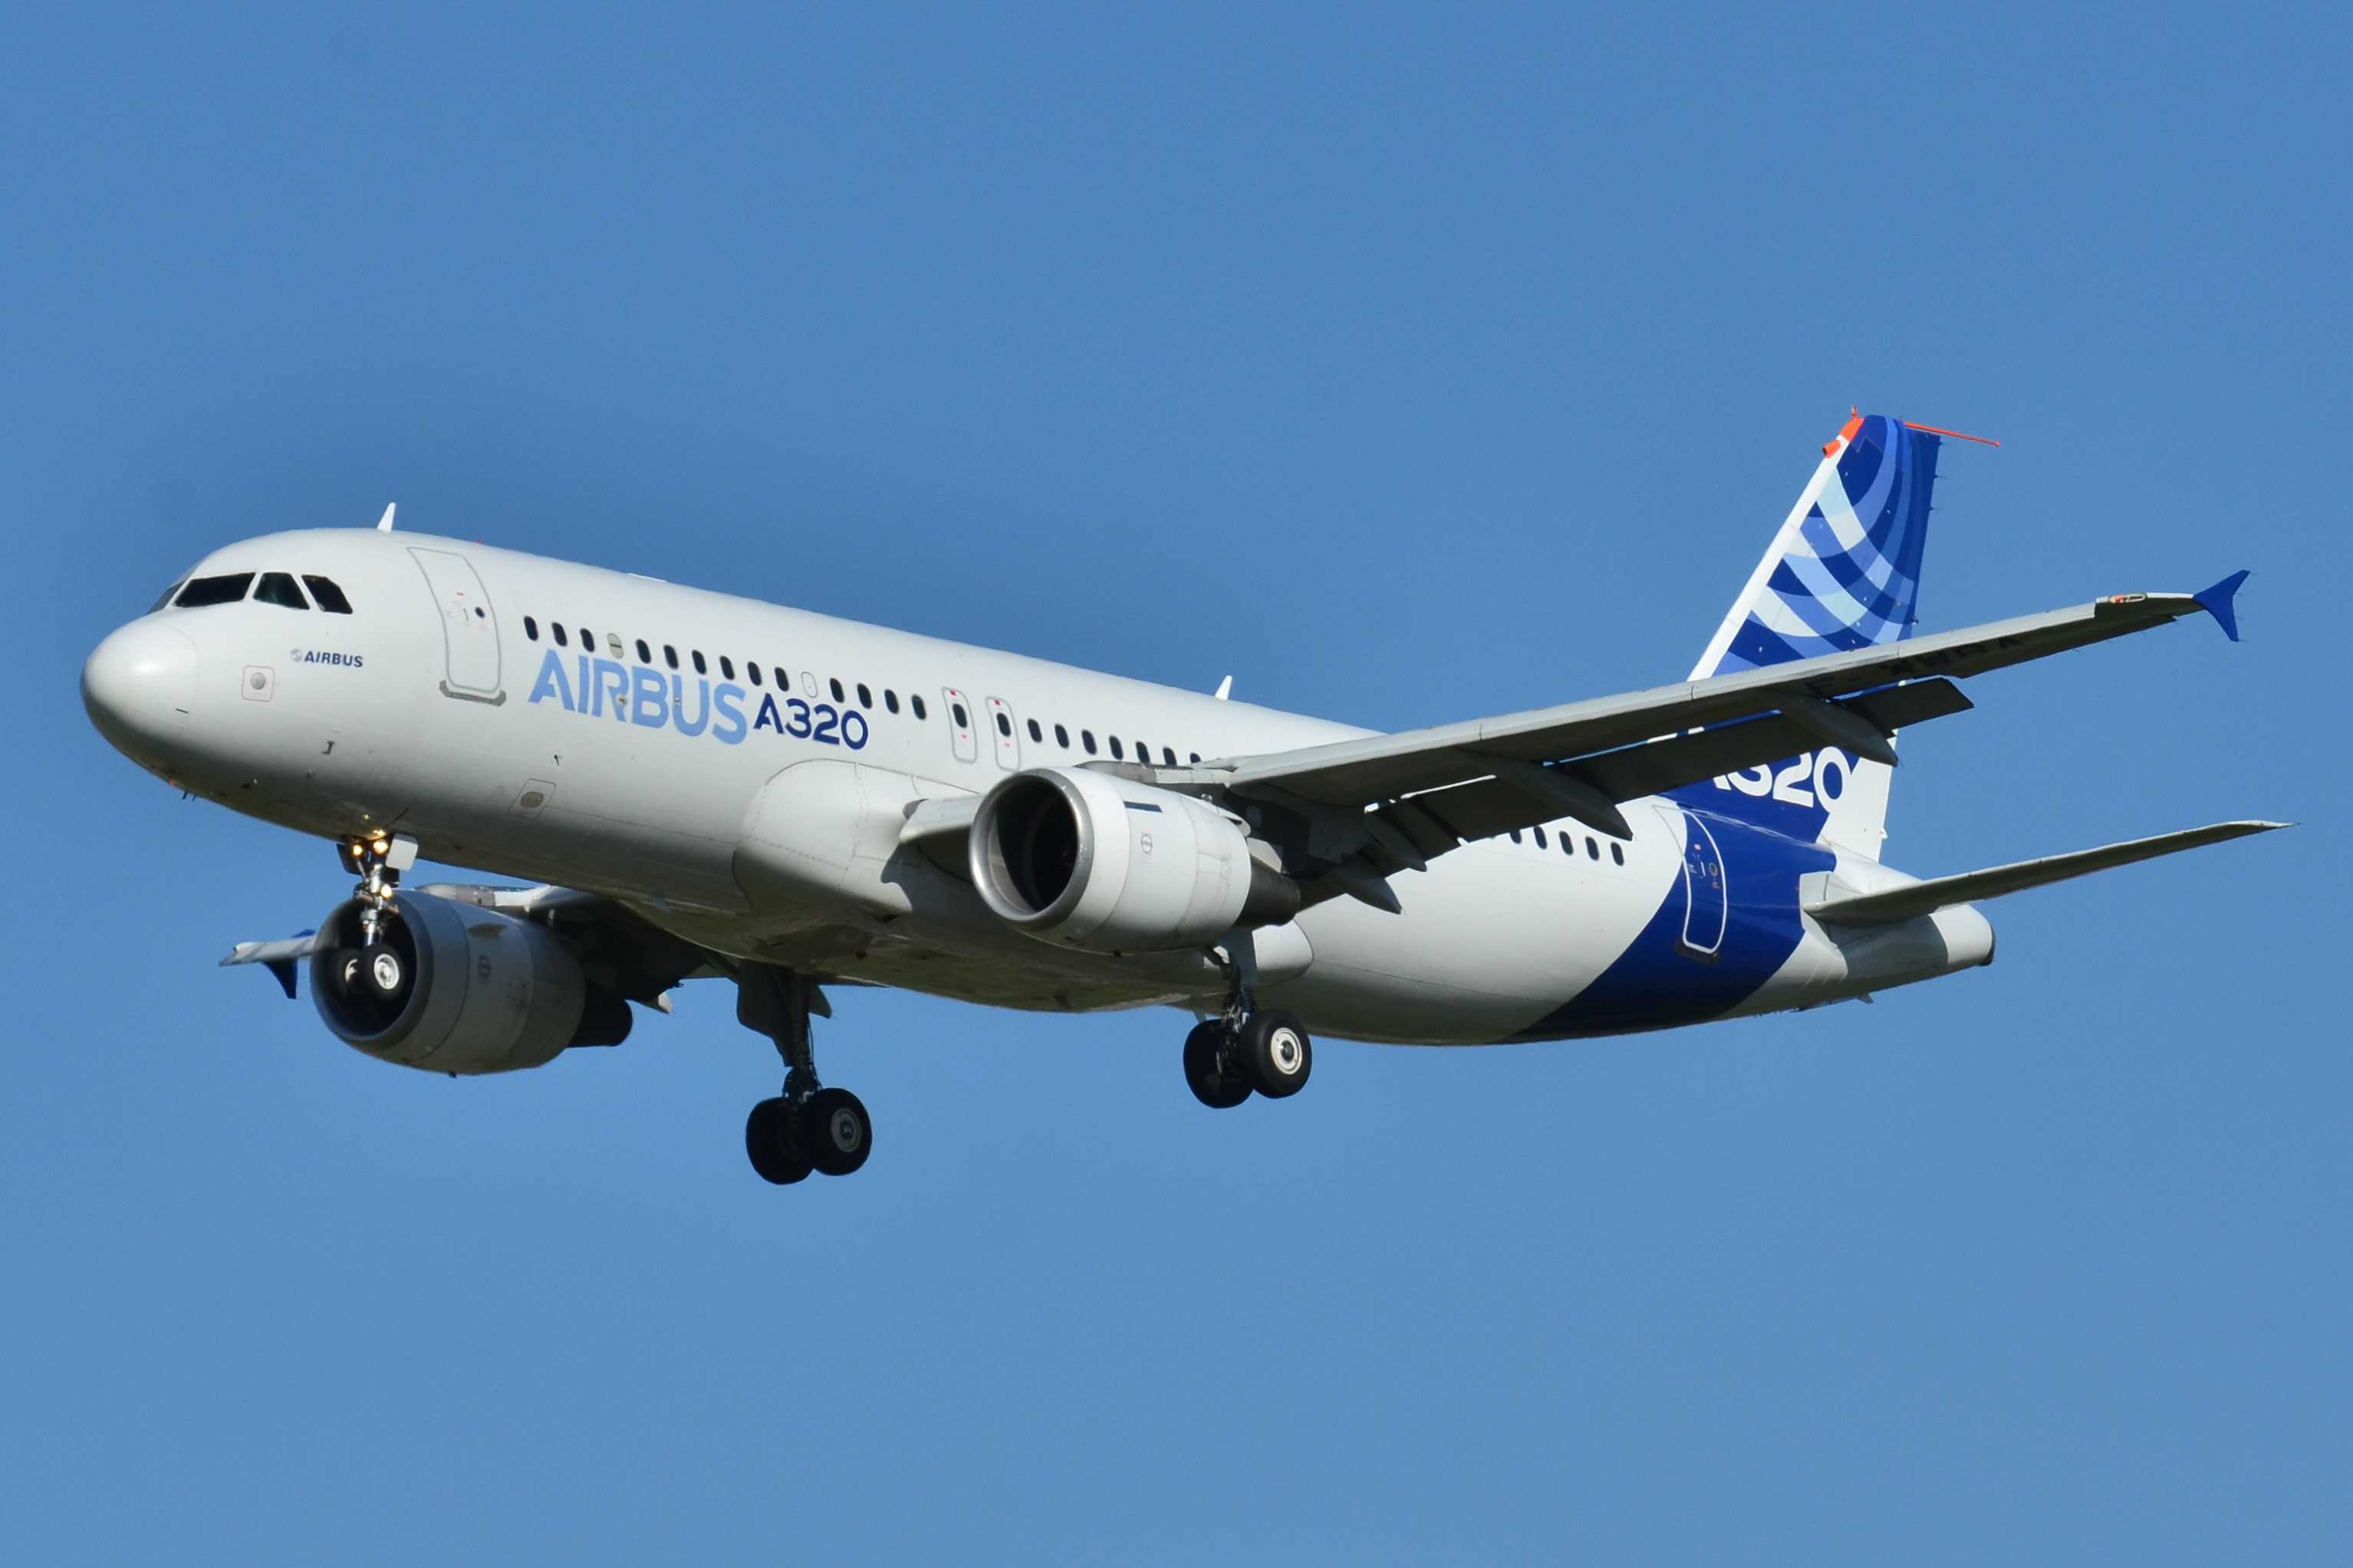 AIRBUS A320 FOR SALE: 1 X 1999 AIRBUS A320-212 FOR SALE & USD 2 X 2003 AIRBUS A320-232 FOR SALE.